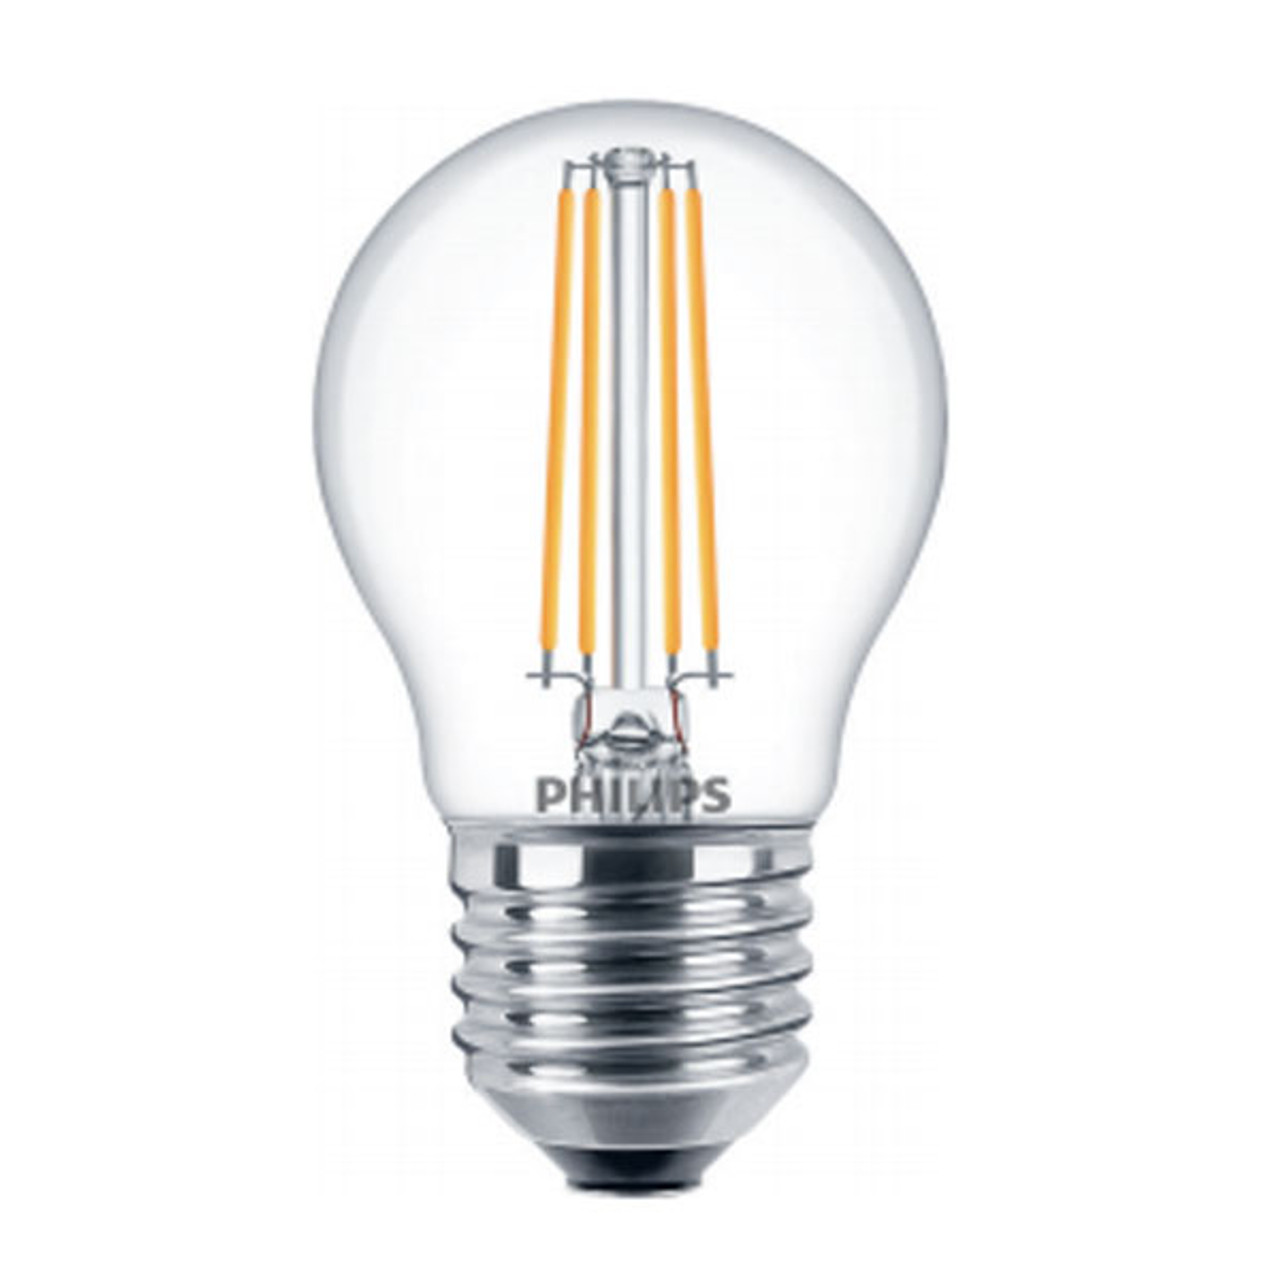 Philips Classic LED P45 5W E27 Clear Very Warm White Dimmable